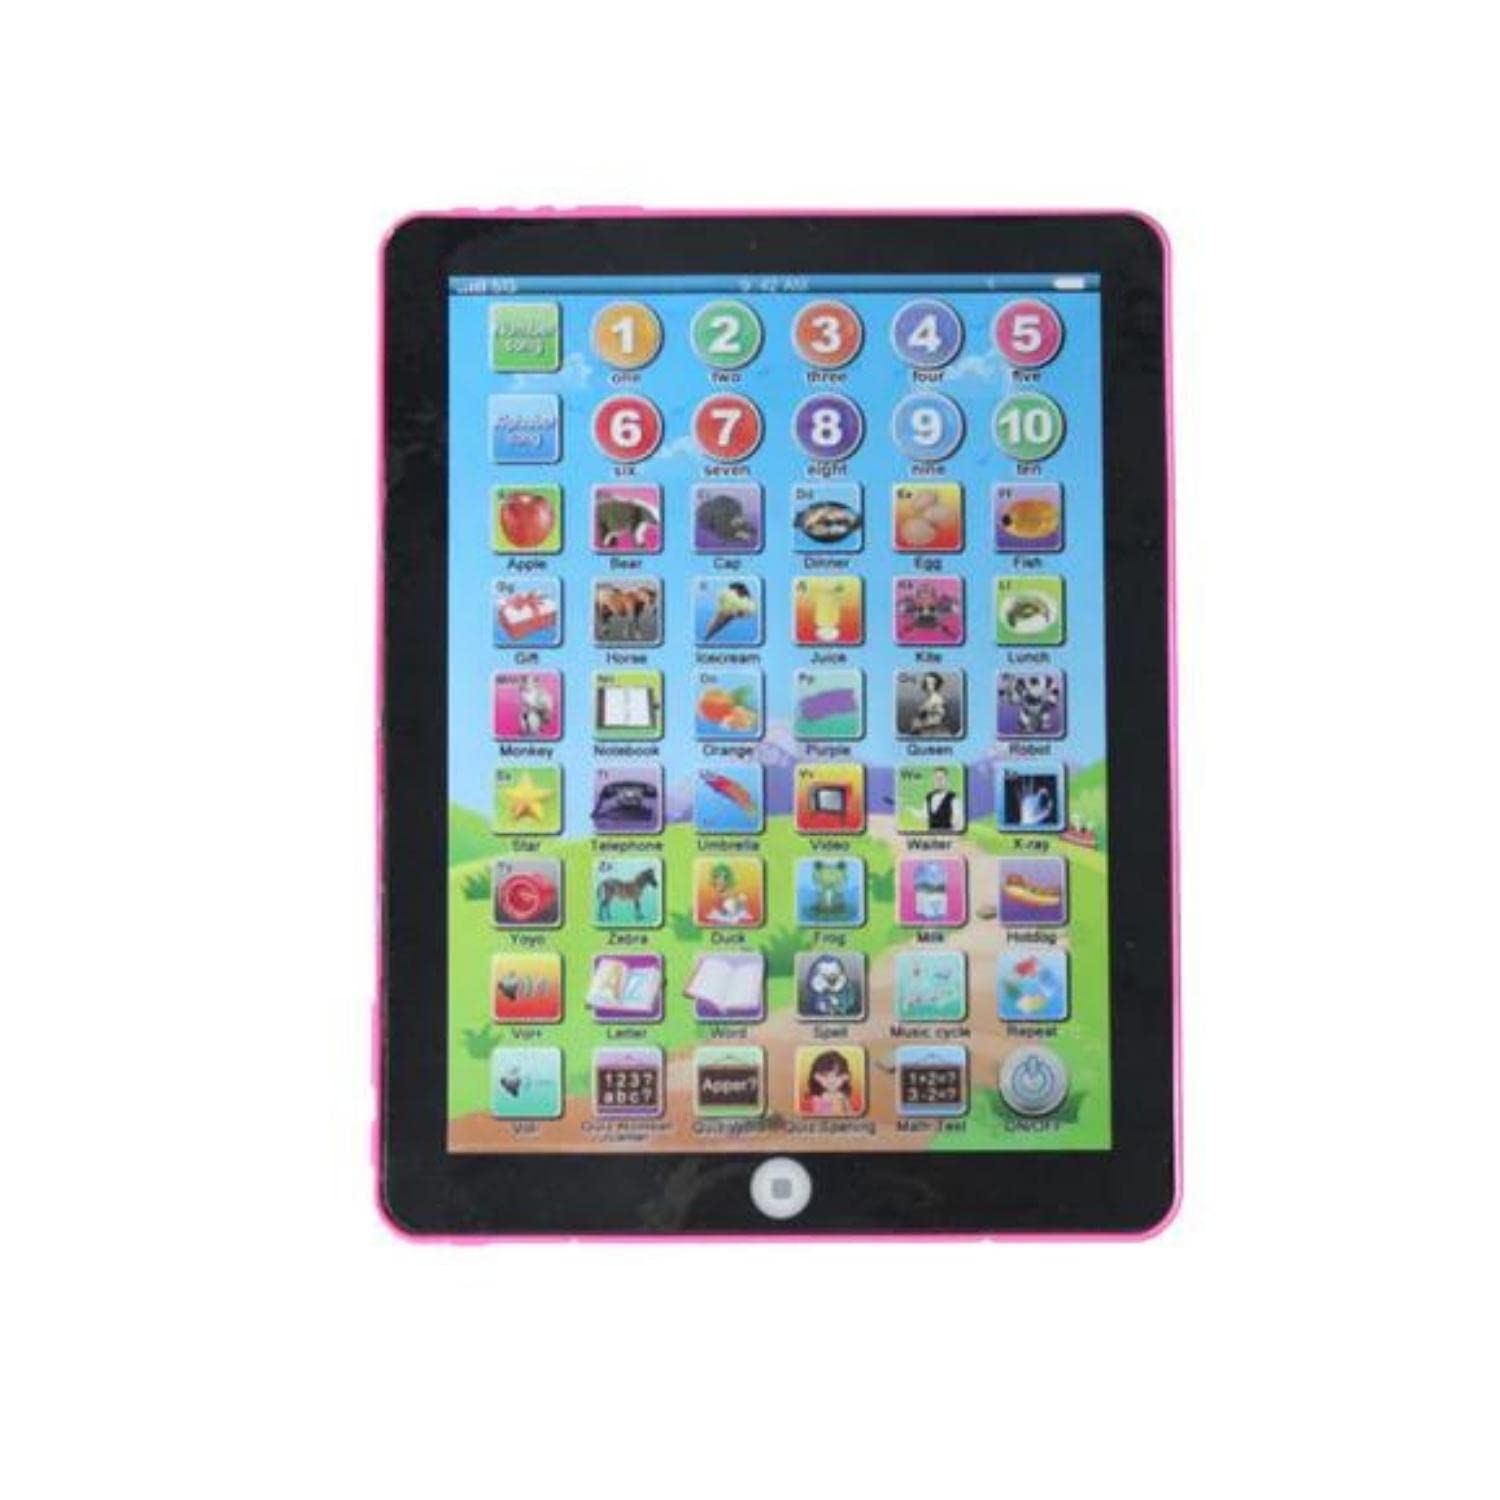 Kids Mandi Learning Pad - Educational toys for 3-6 years.